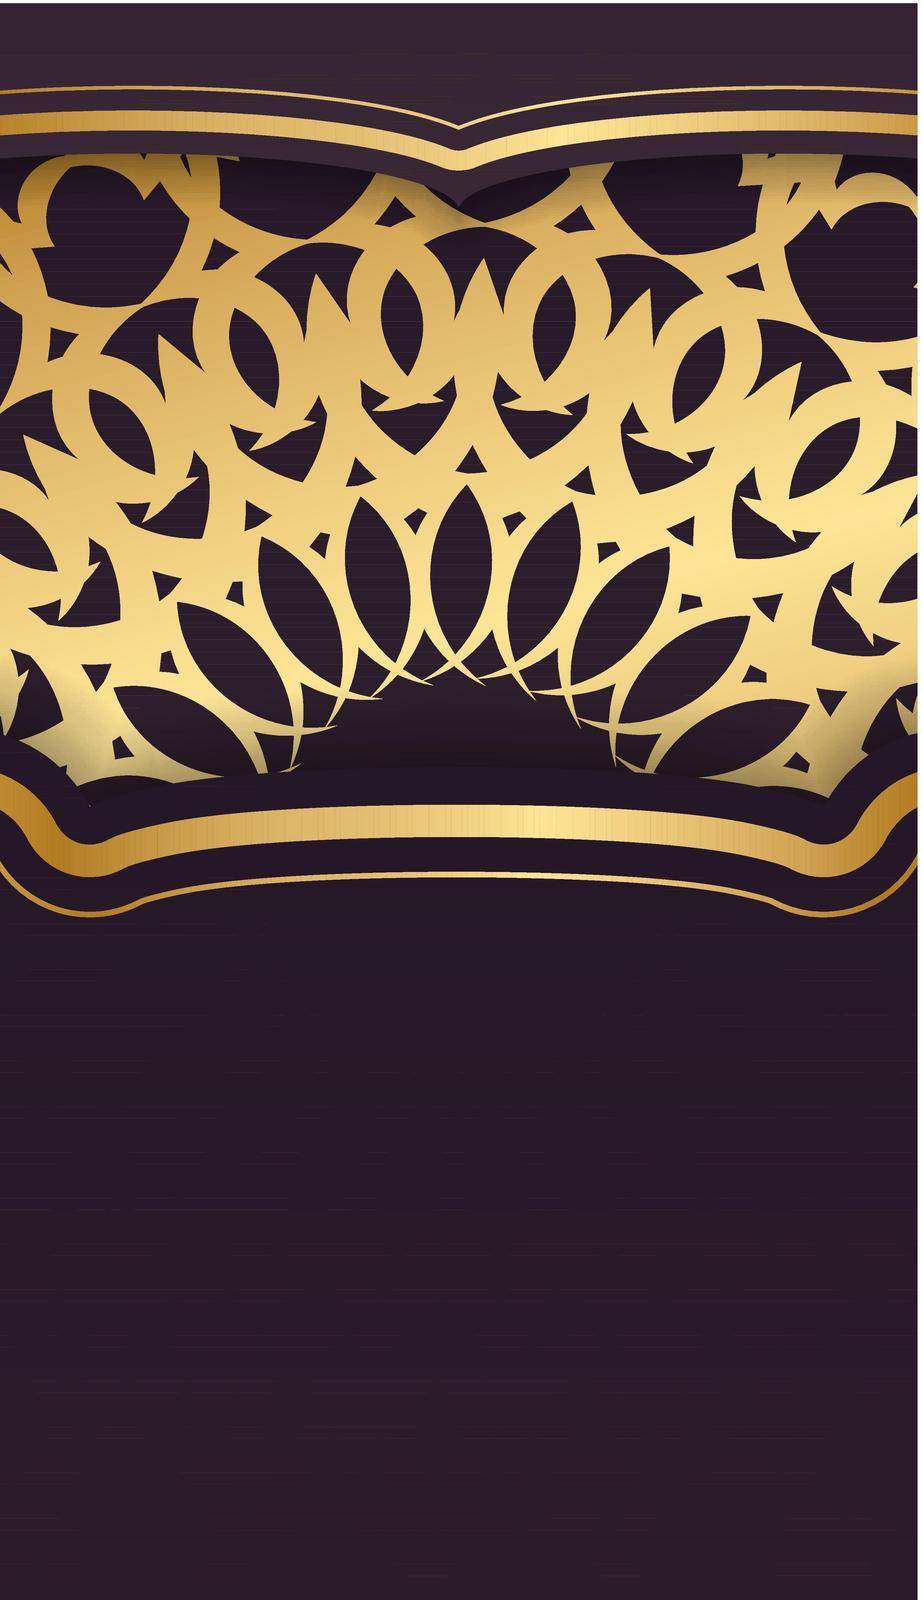 Burgundy background with abstract gold ornament for design under your logo